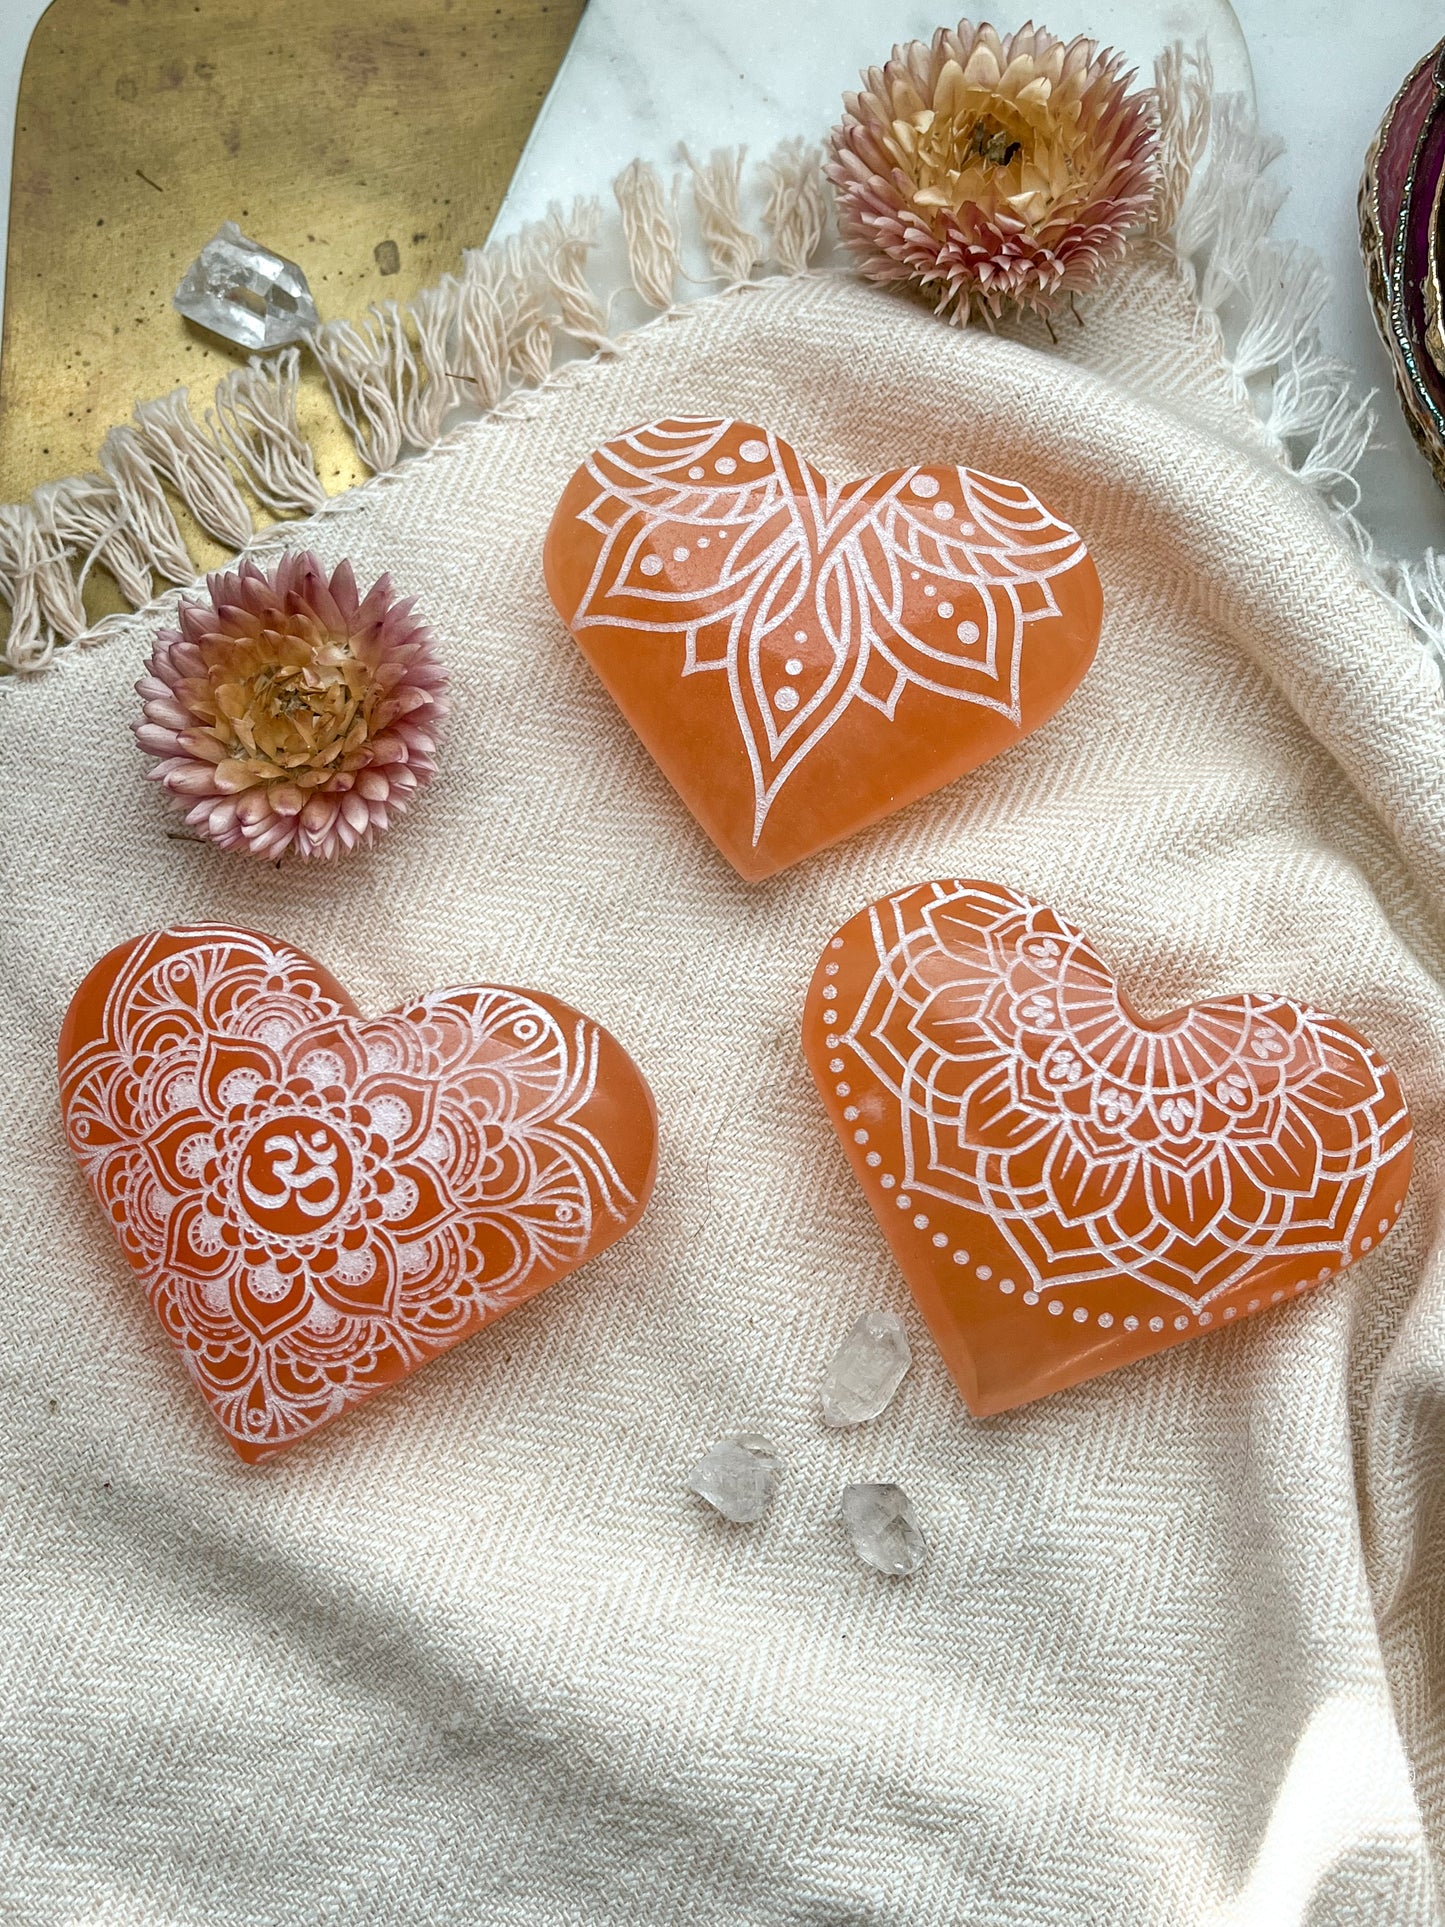 Engraved Peach Selenite Heart Shaped Crystal Mother's Day Gift Home Decor - Fractalista Designs